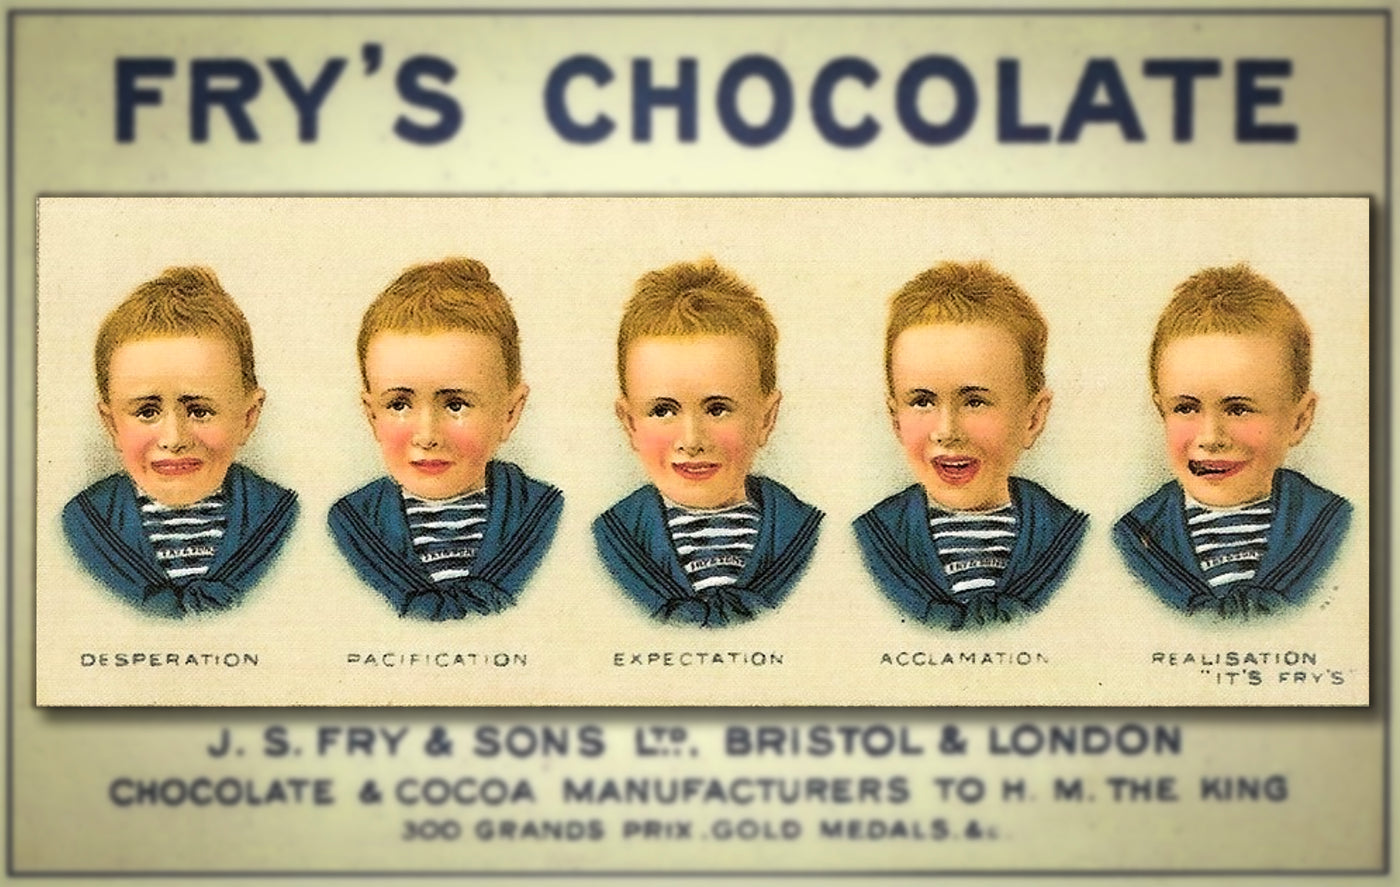 Frys Chocolate advertising by J.S. & Sons of Bristol, England